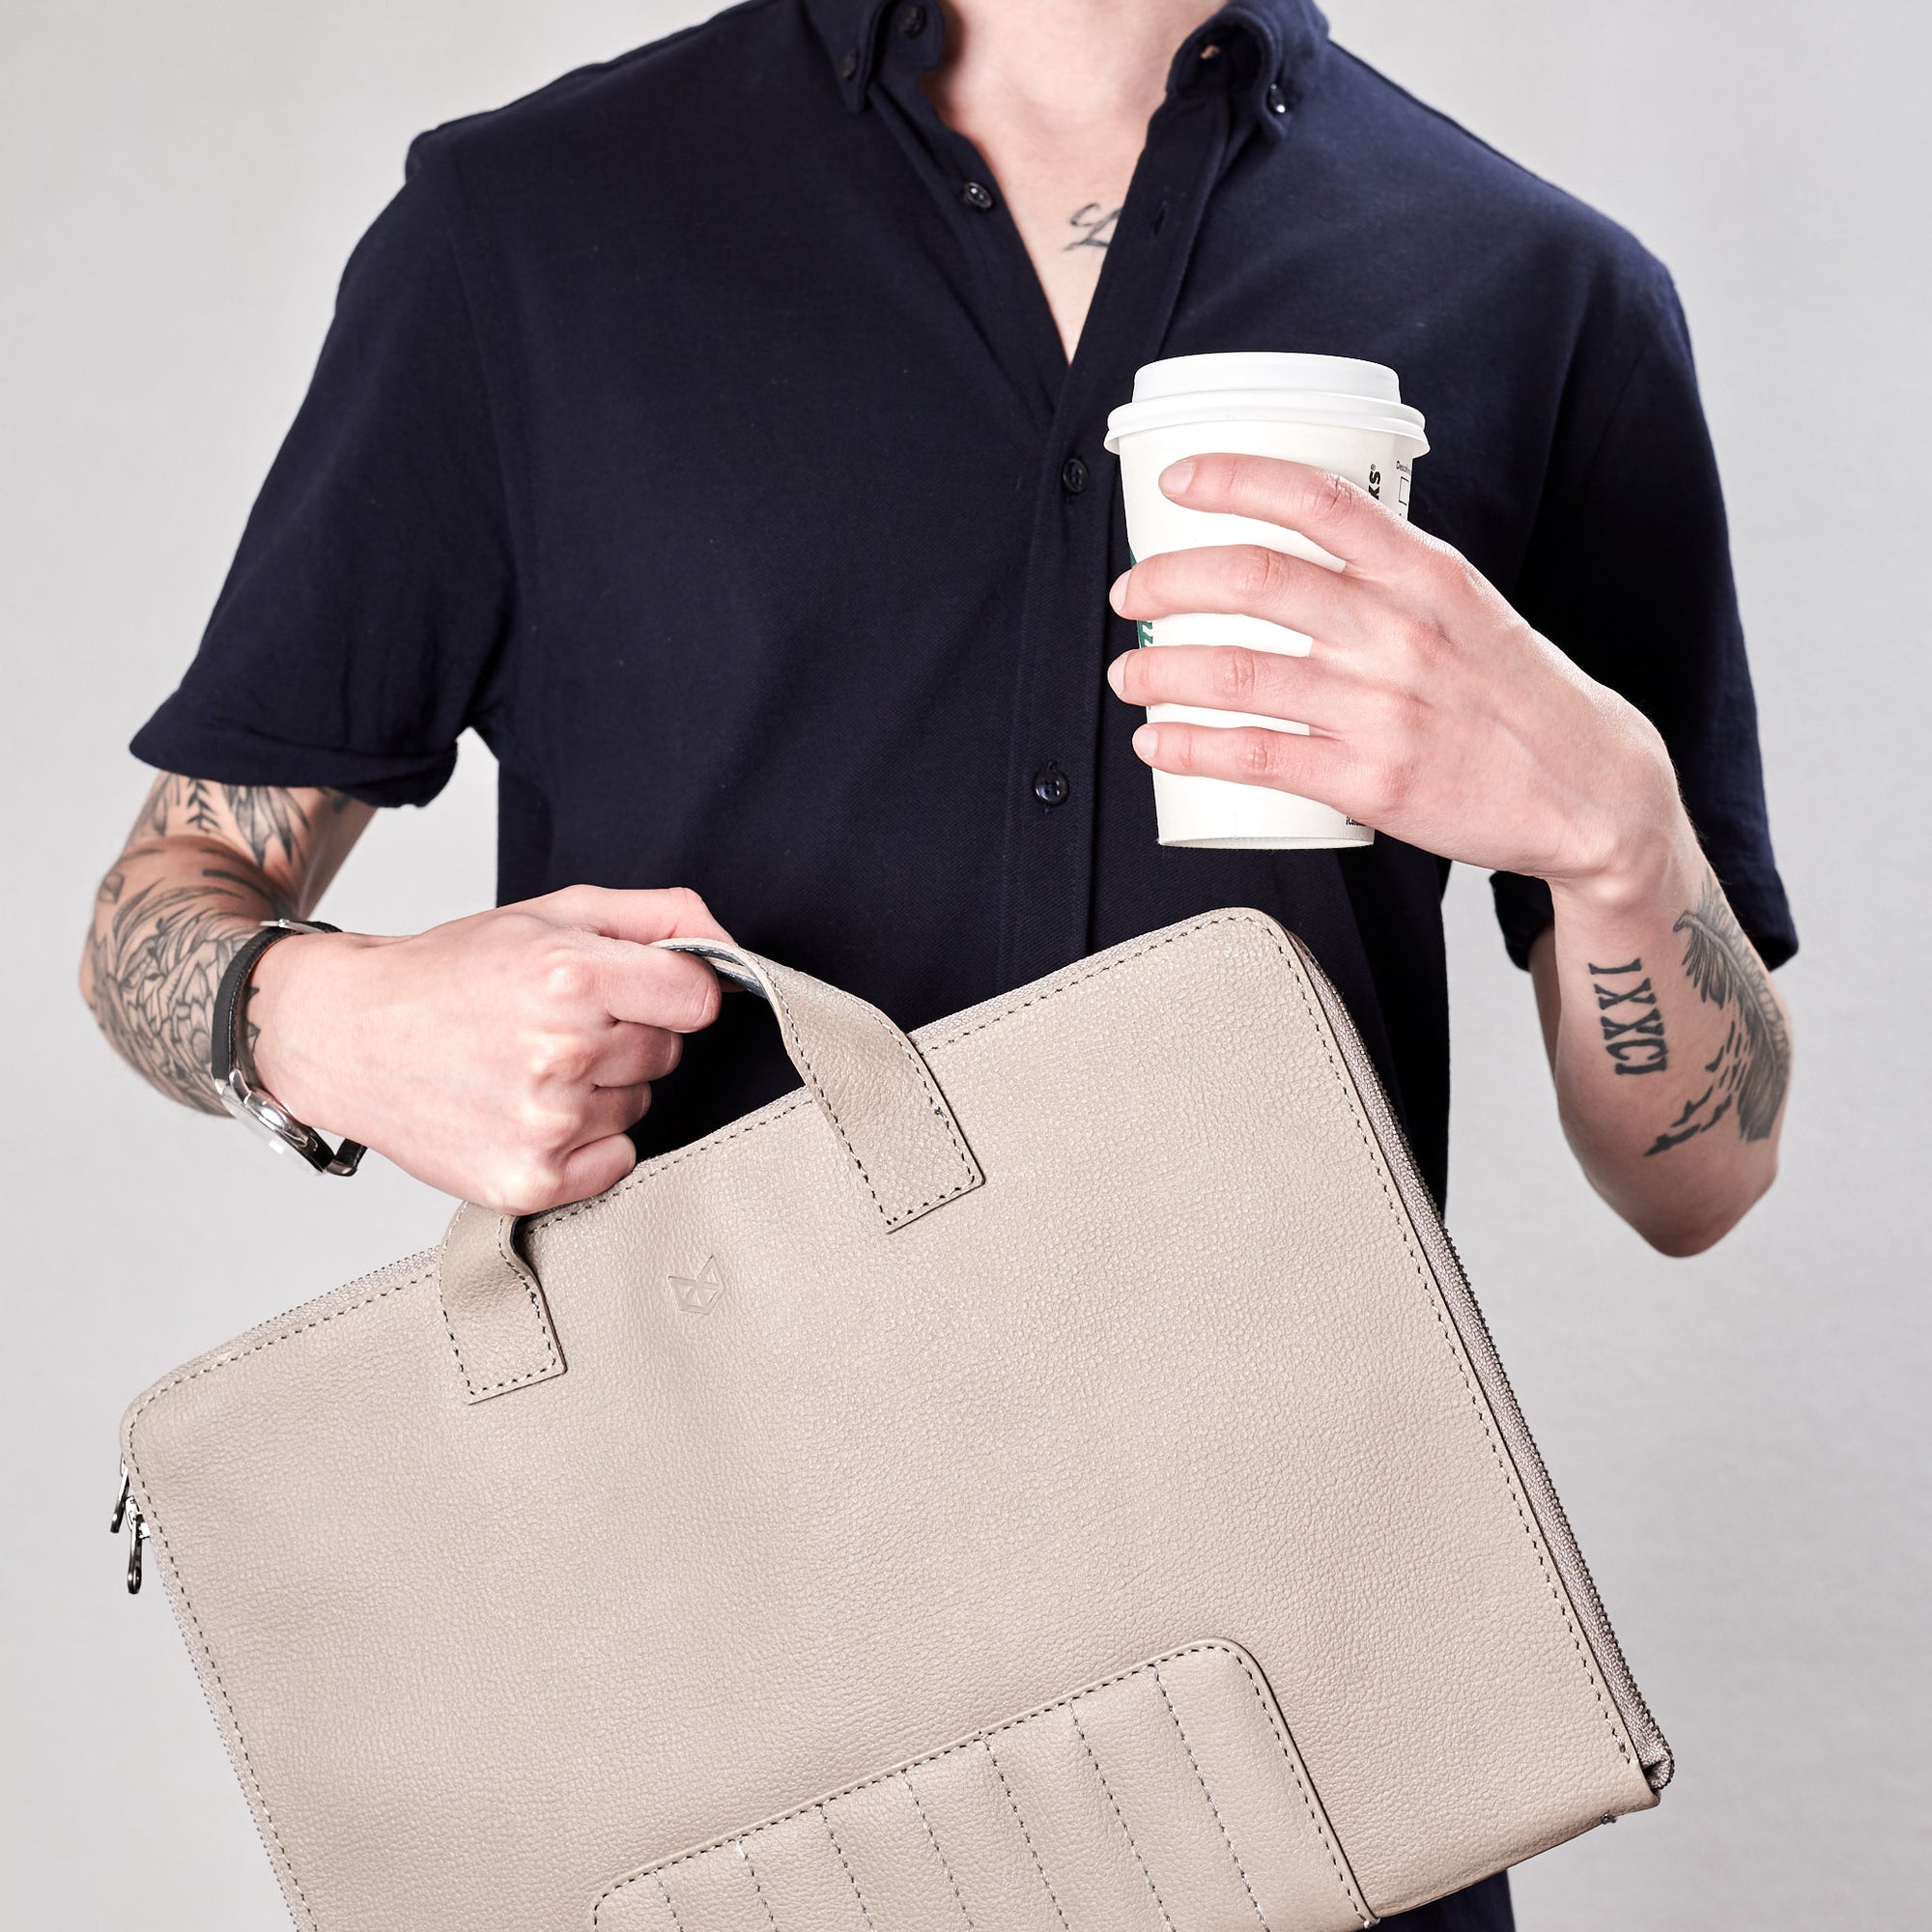 Biker grey portfolio style picture and coffee. Holding Biker with handles. Portfolio made by Capra Leather.